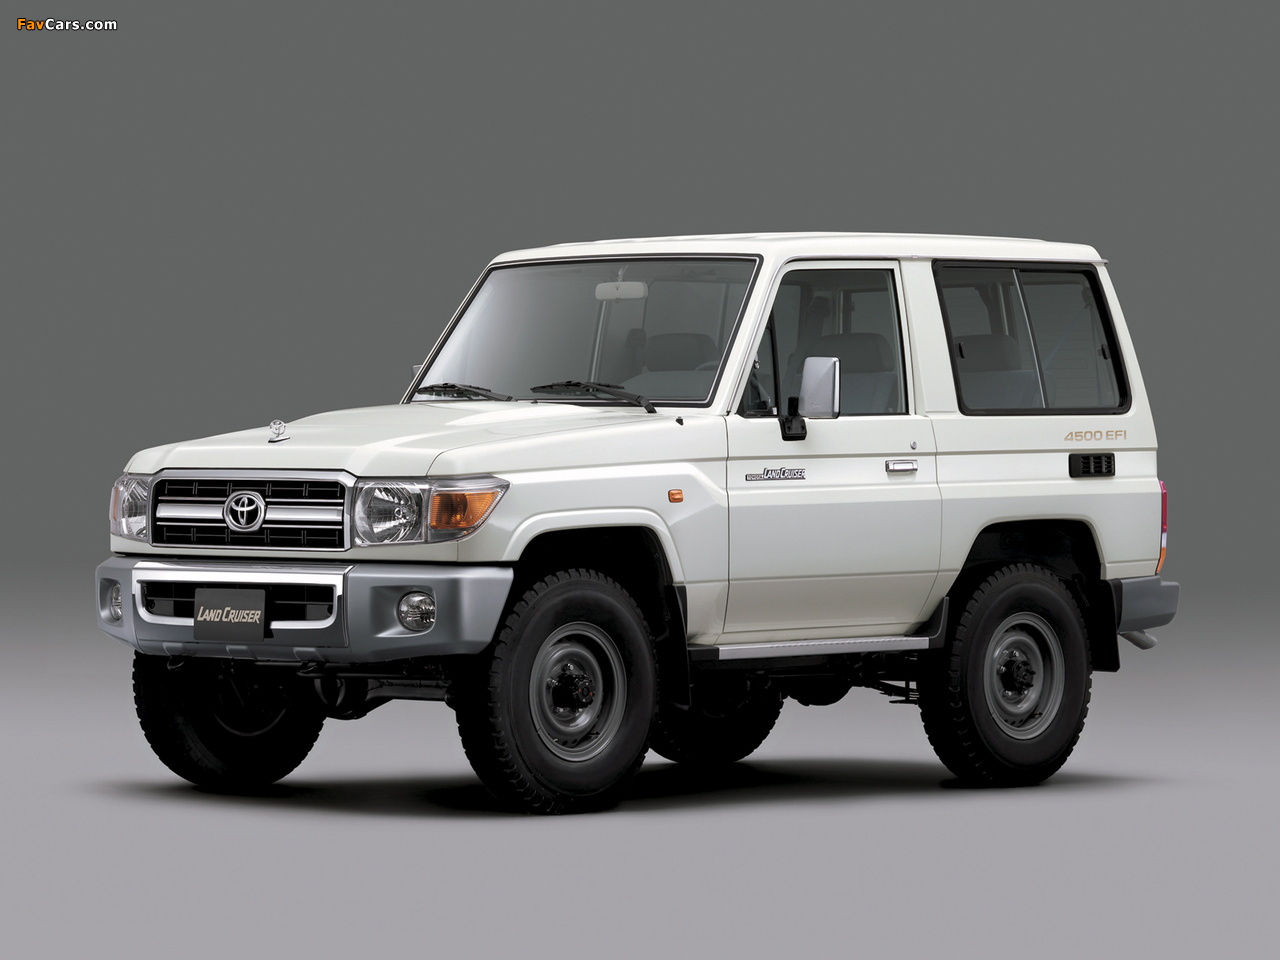 Toyota Land Cruiser (J71) 2007 pictures (1280 x 960)